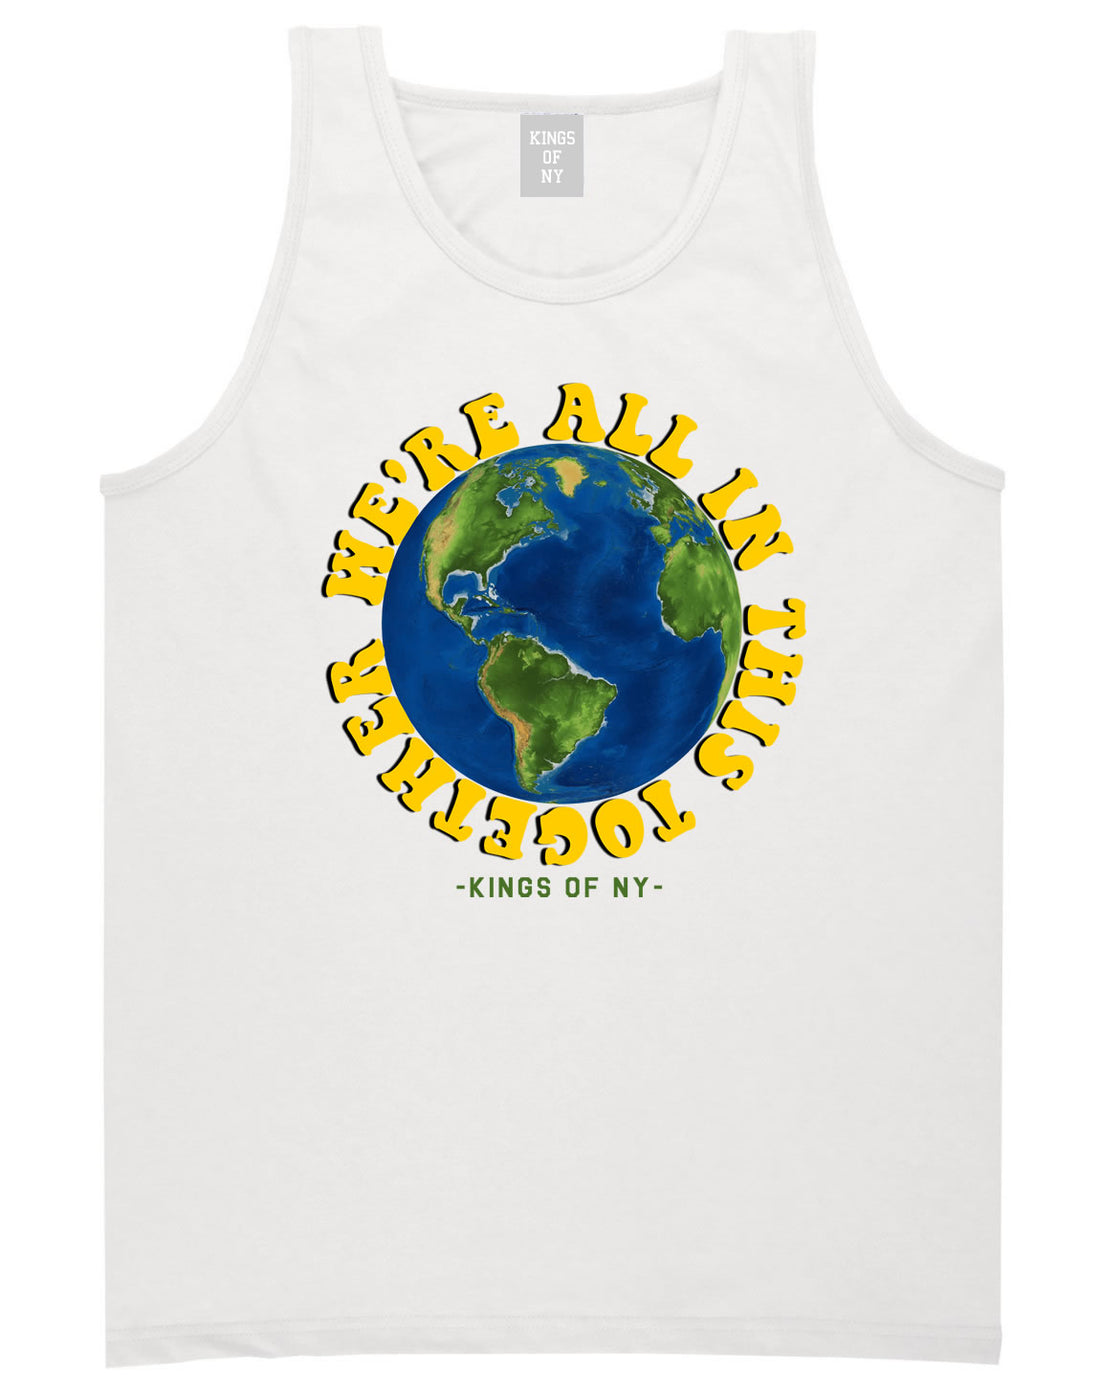 We're All In This Together Earth Mens Tank Top Shirt White